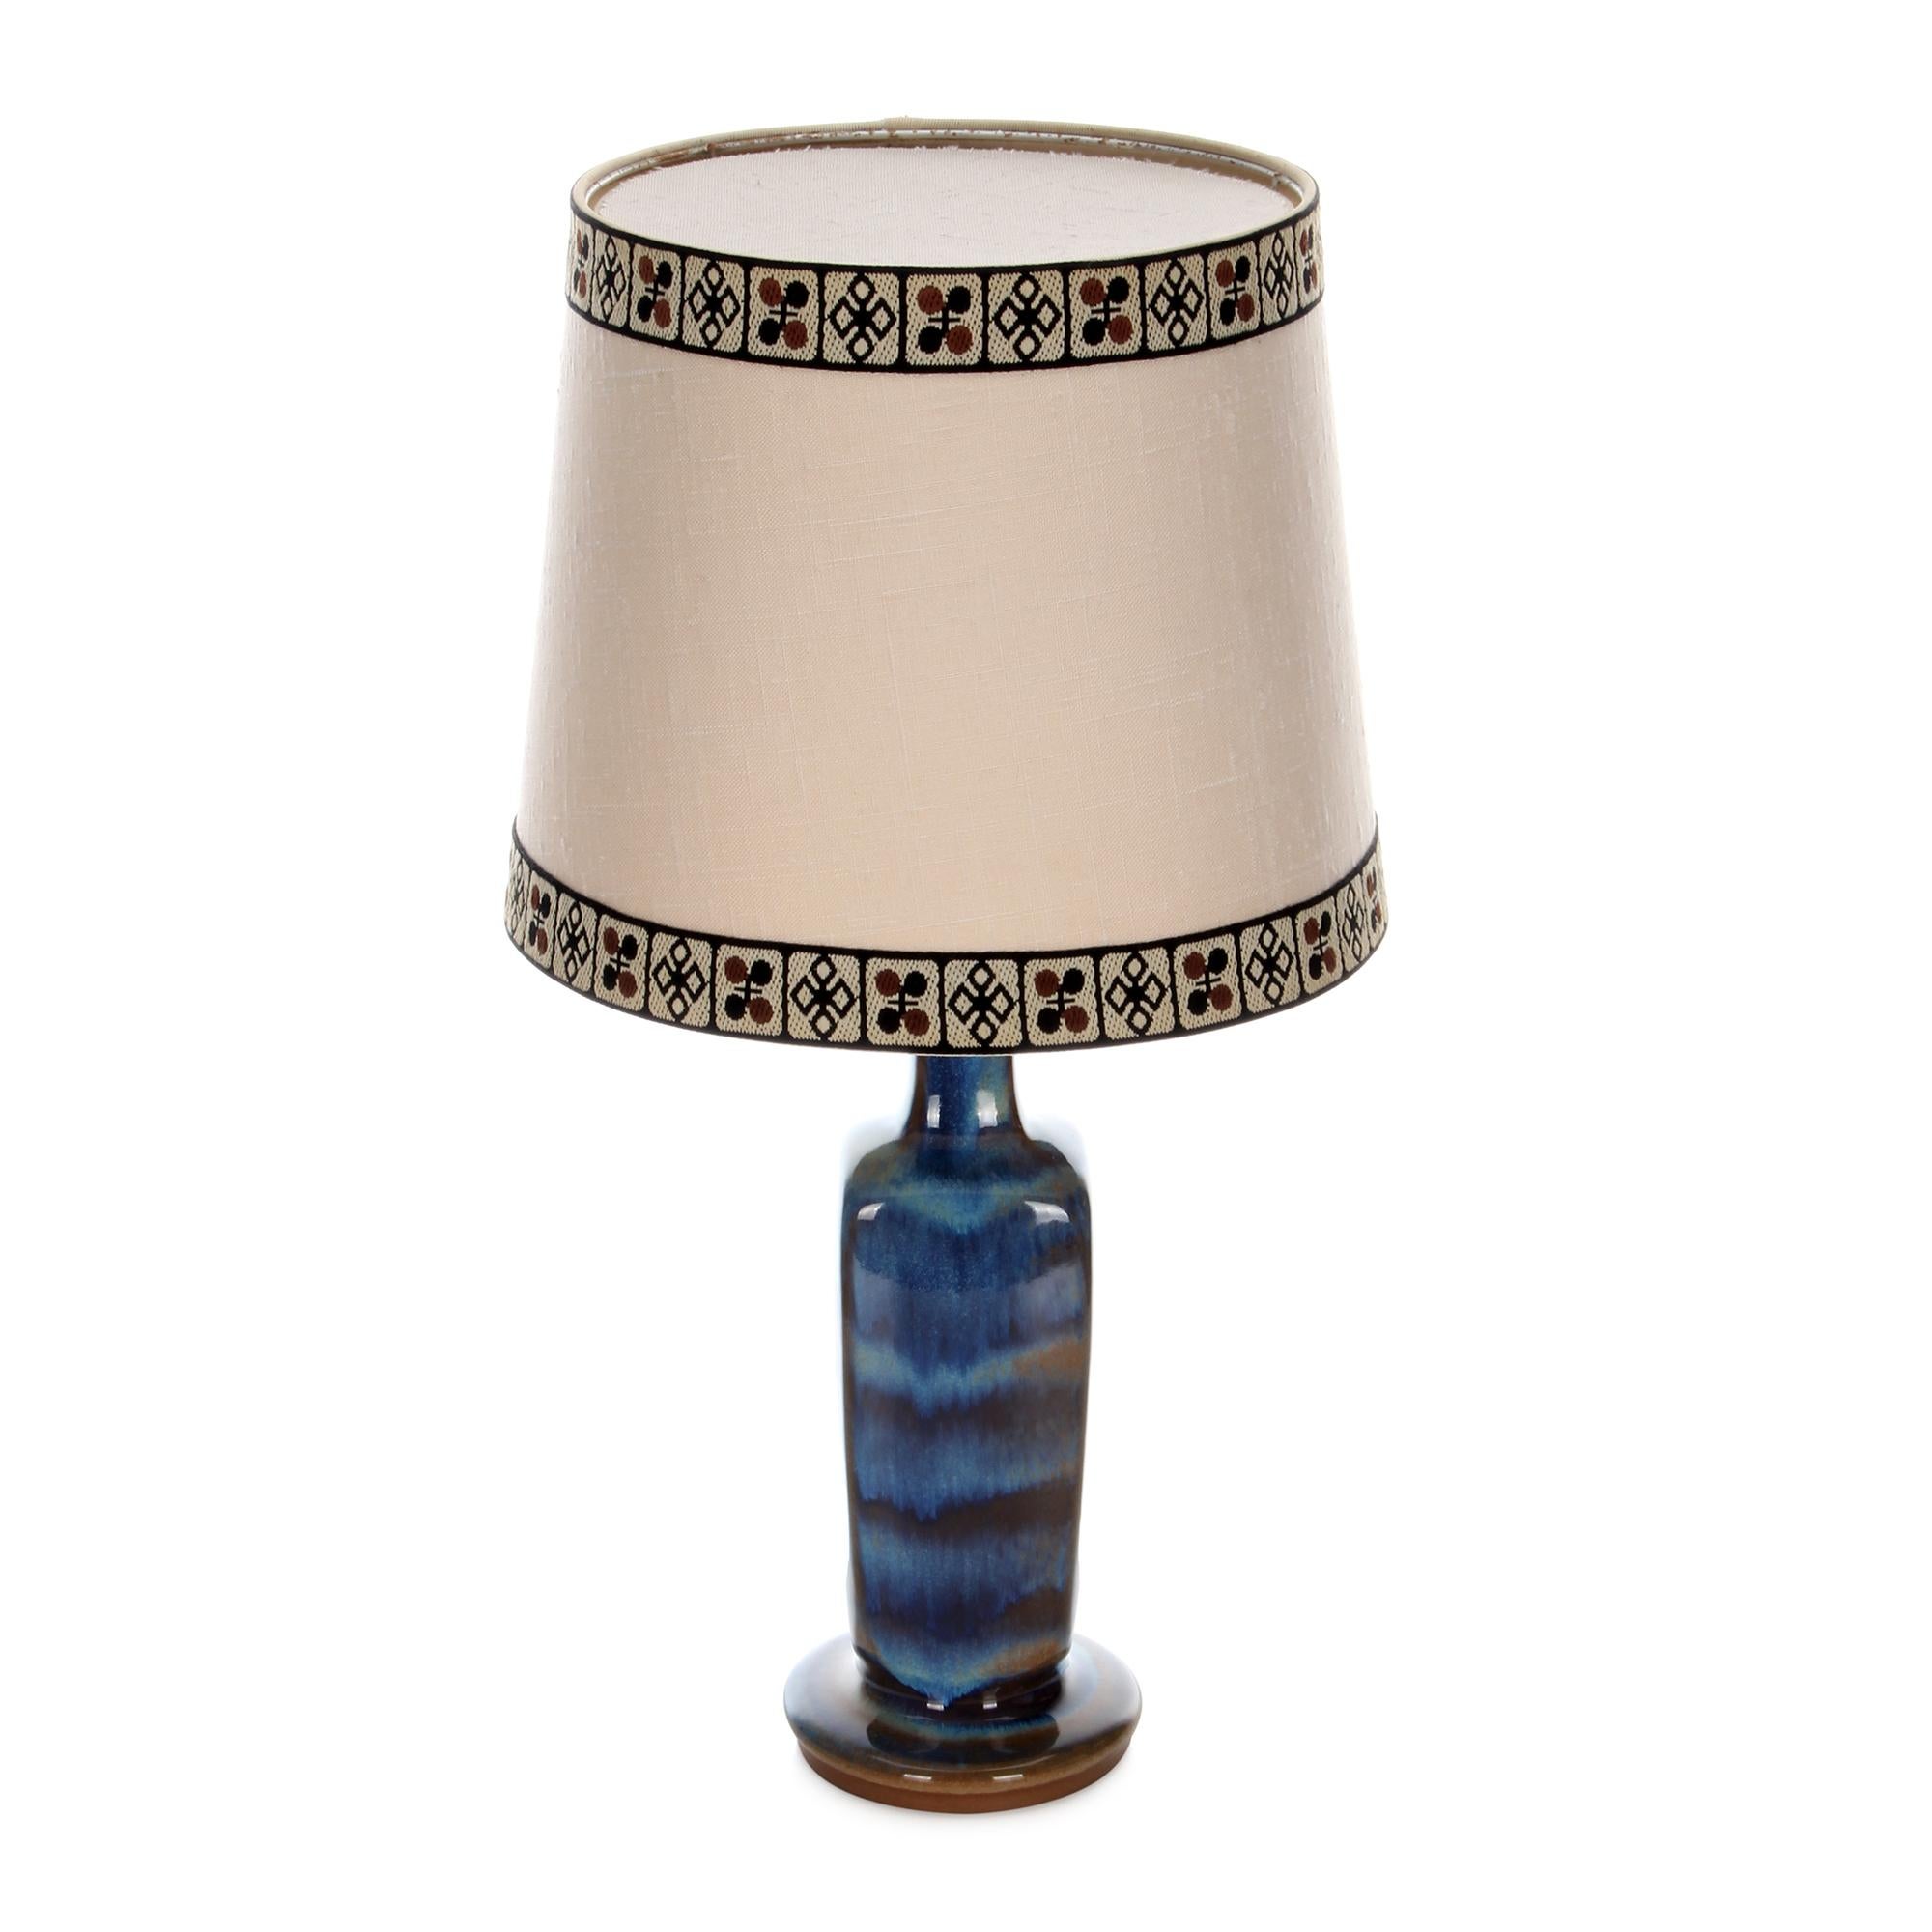 Glazed Blue Table Lamp by Michael Andersen & Son 1960s, with Vintage Shade Included